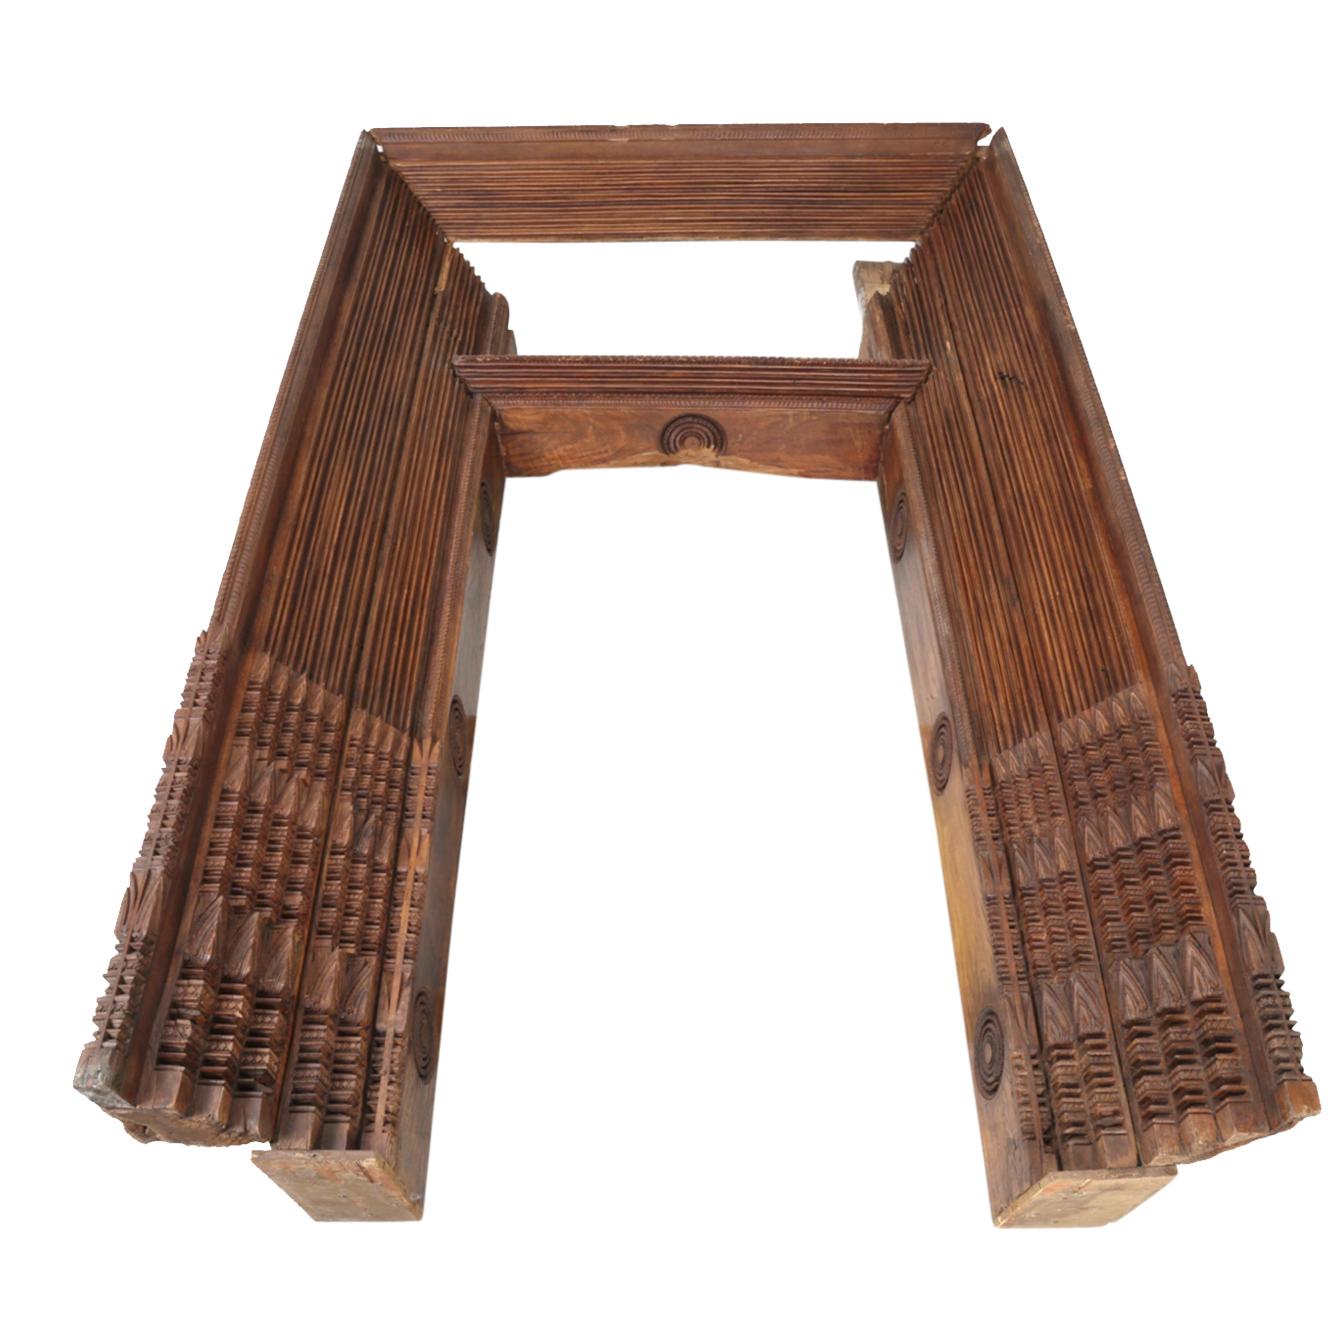 Antique Teak Wood Door Frame India Exquisite Carving Details (3) Available c1800 For Sale